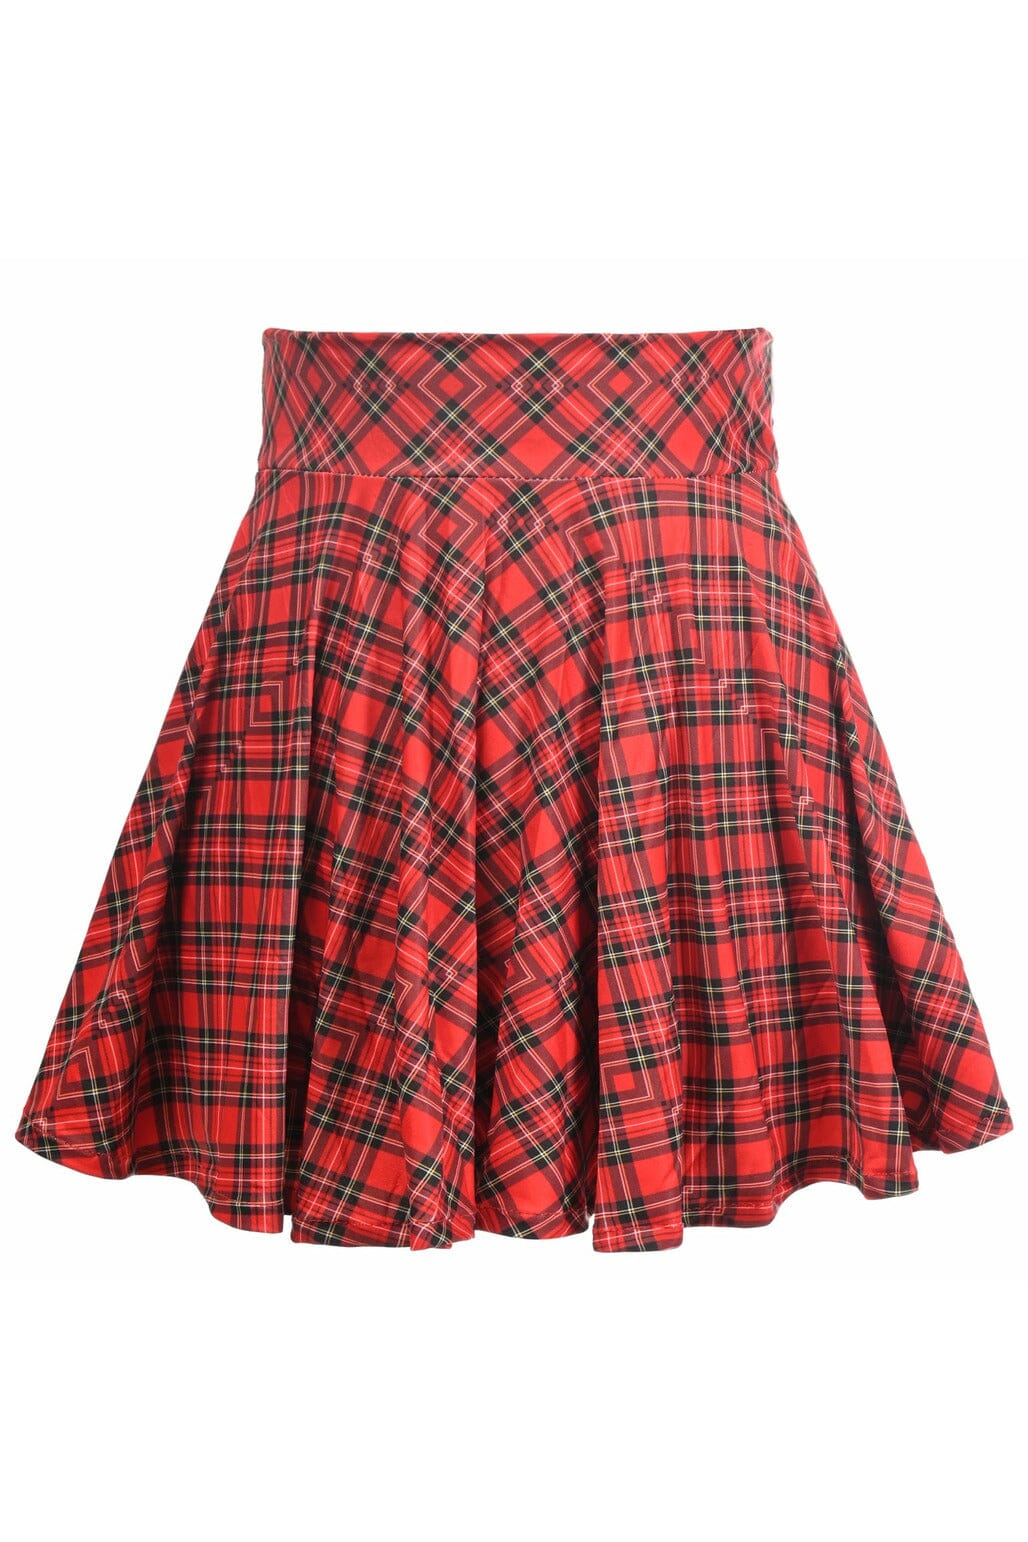 Red Plaid Stretch Lycra Skirt-Costume Skirts-Daisy Corsets-Red-XS-SEXYSHOES.COM